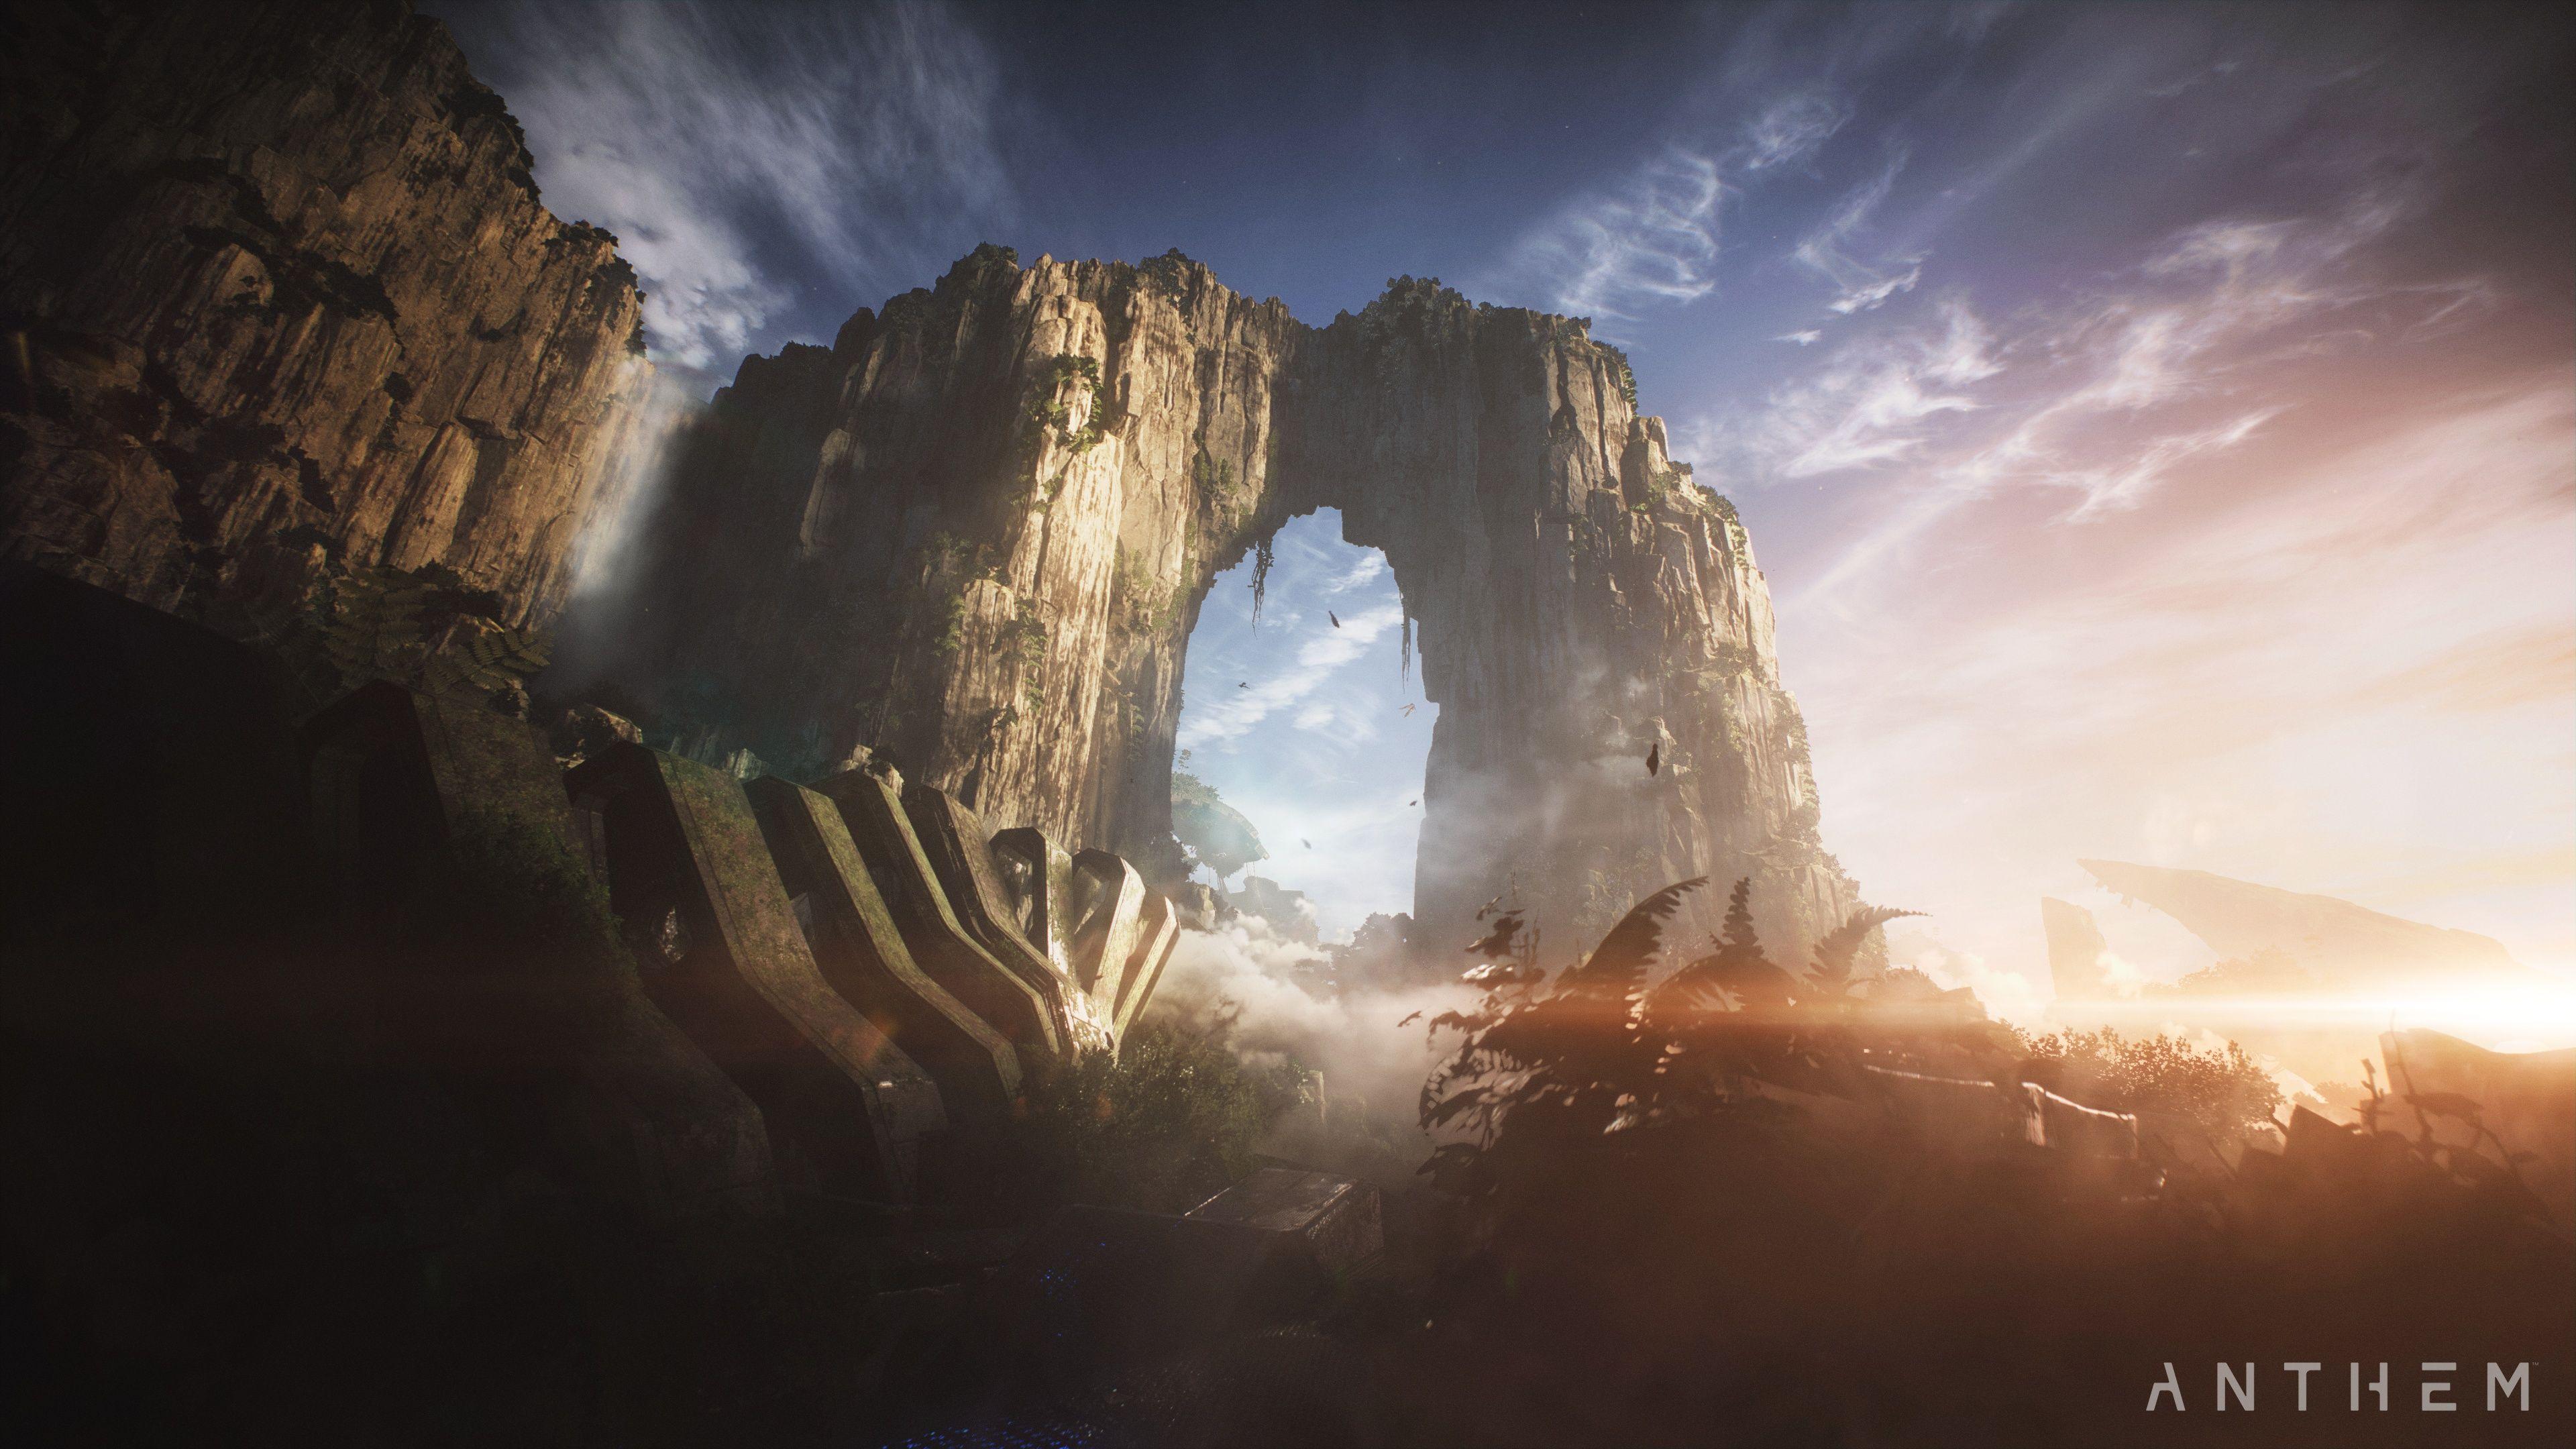 10 4k Hdr Anthem Wallpapers You Need To Make Your Desktop Background